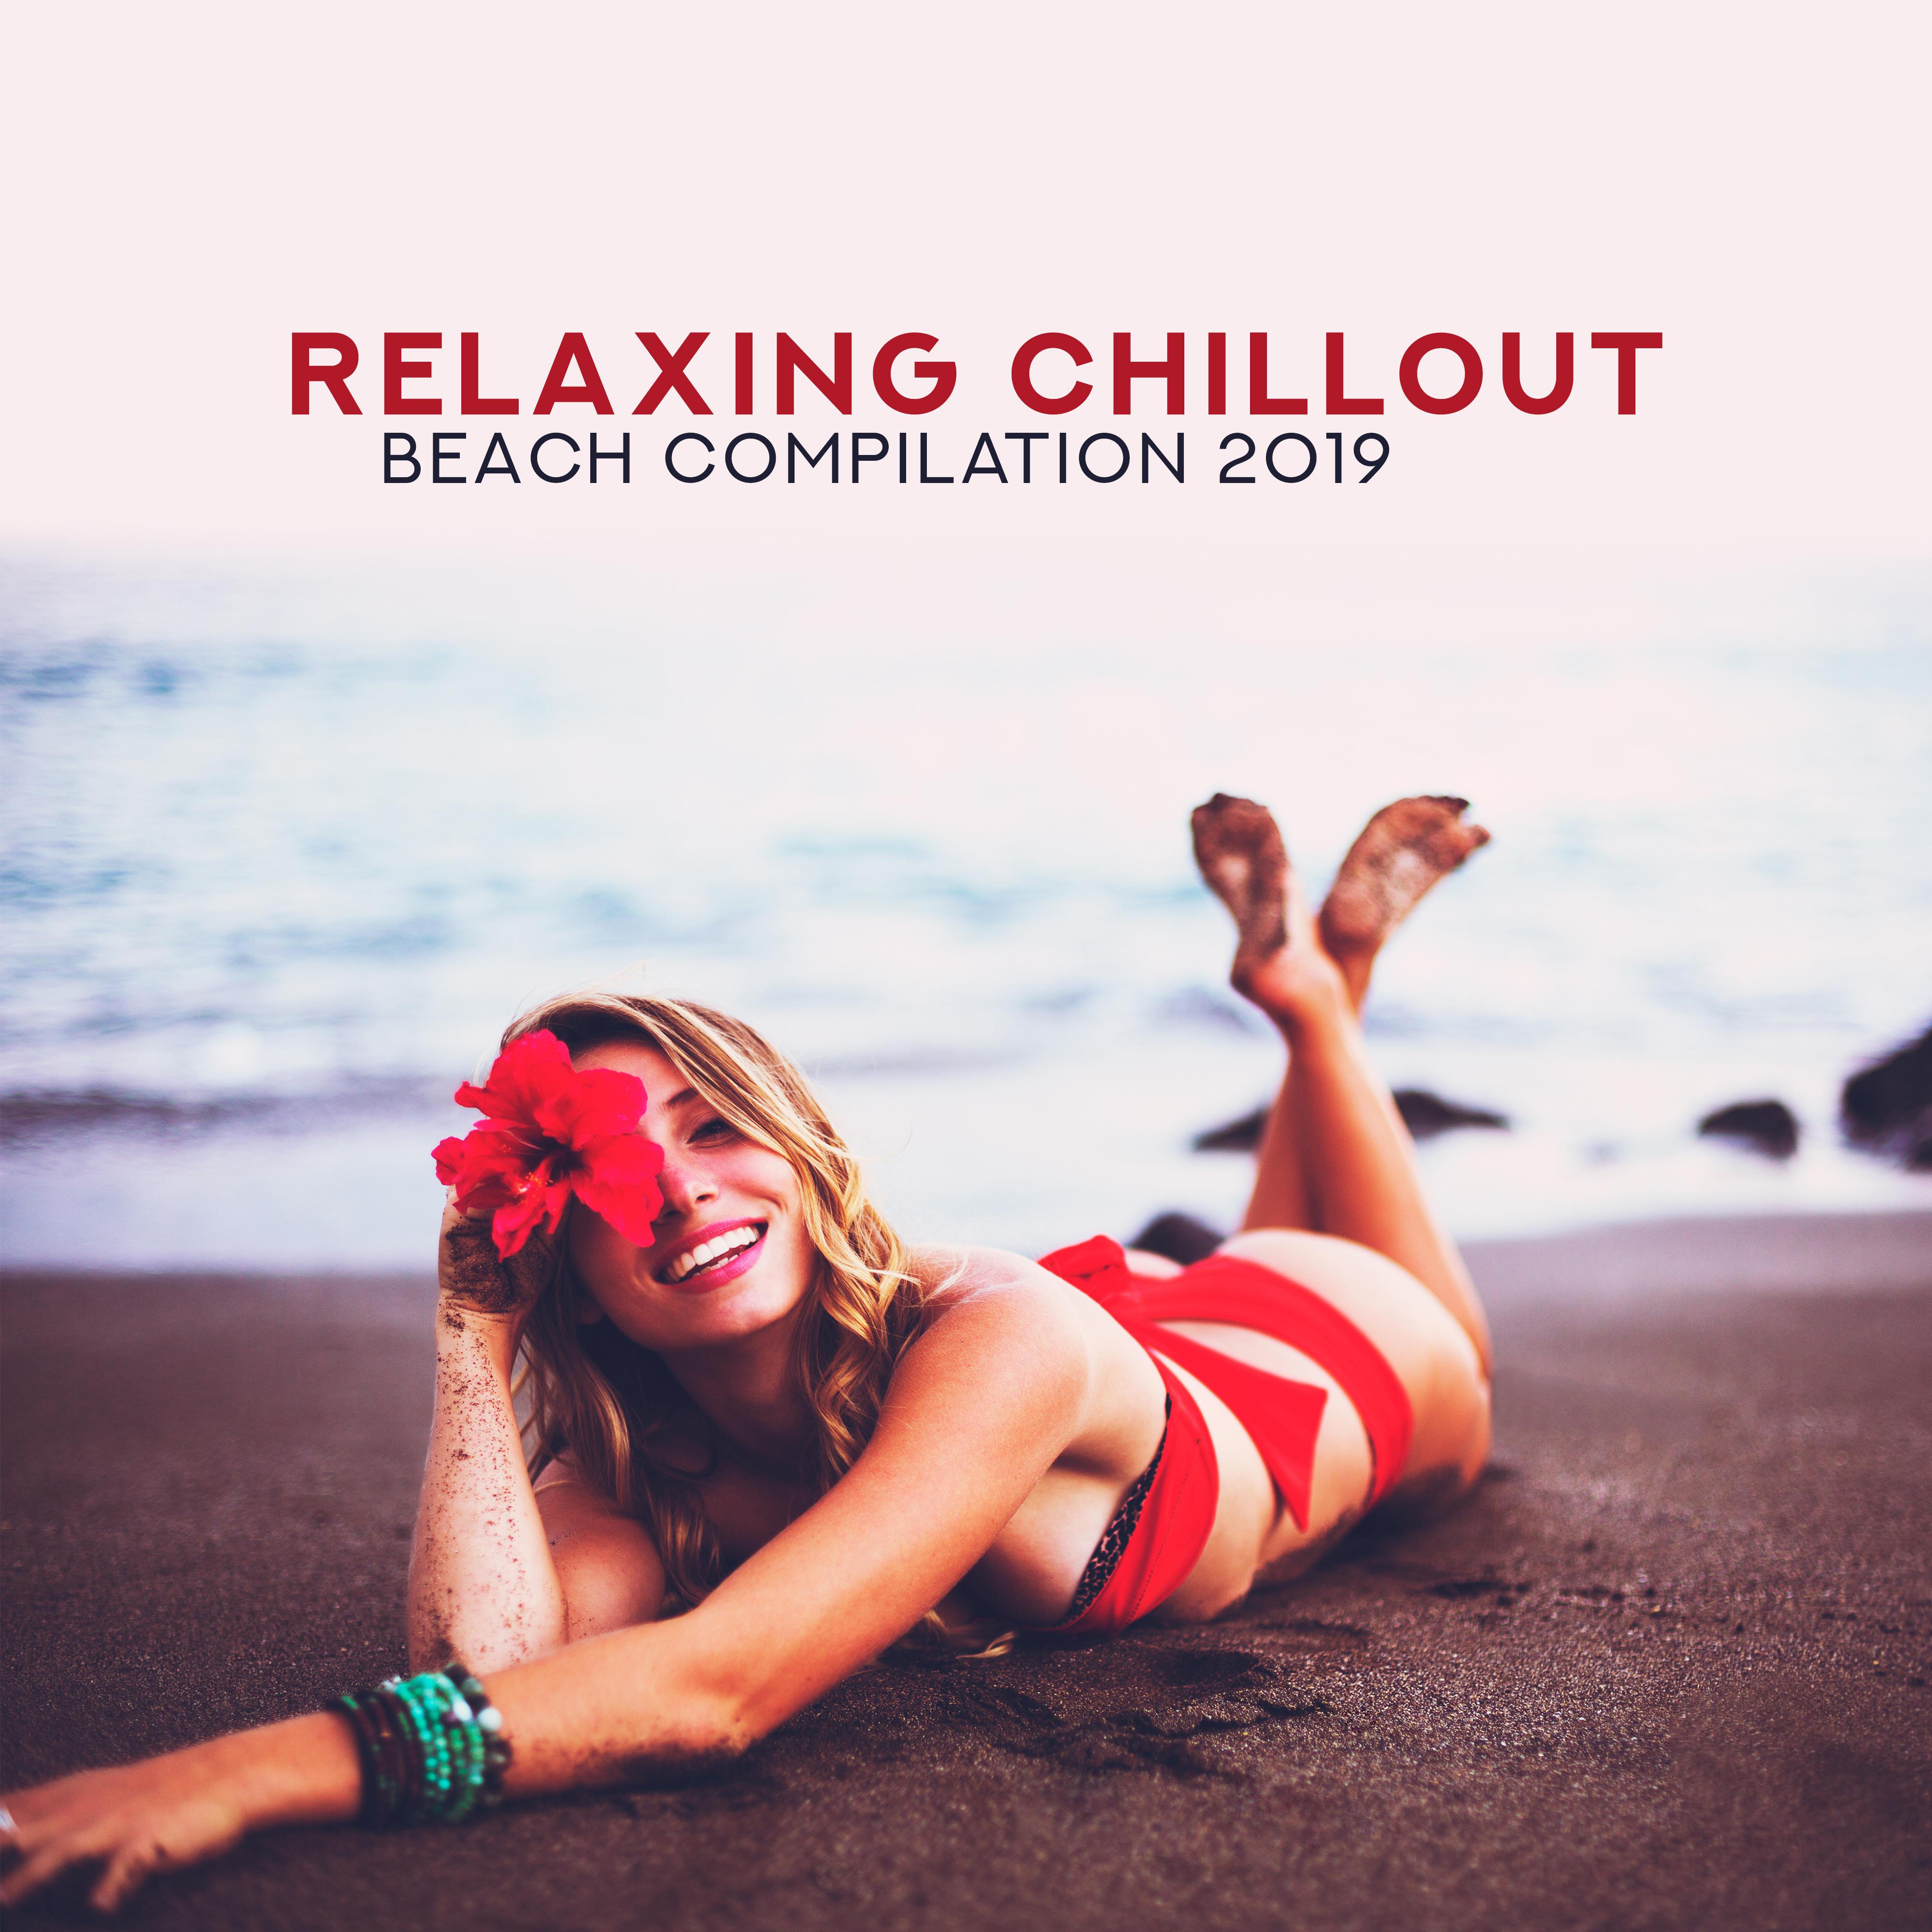 Relaxing Chillout Beach Compilation 2019